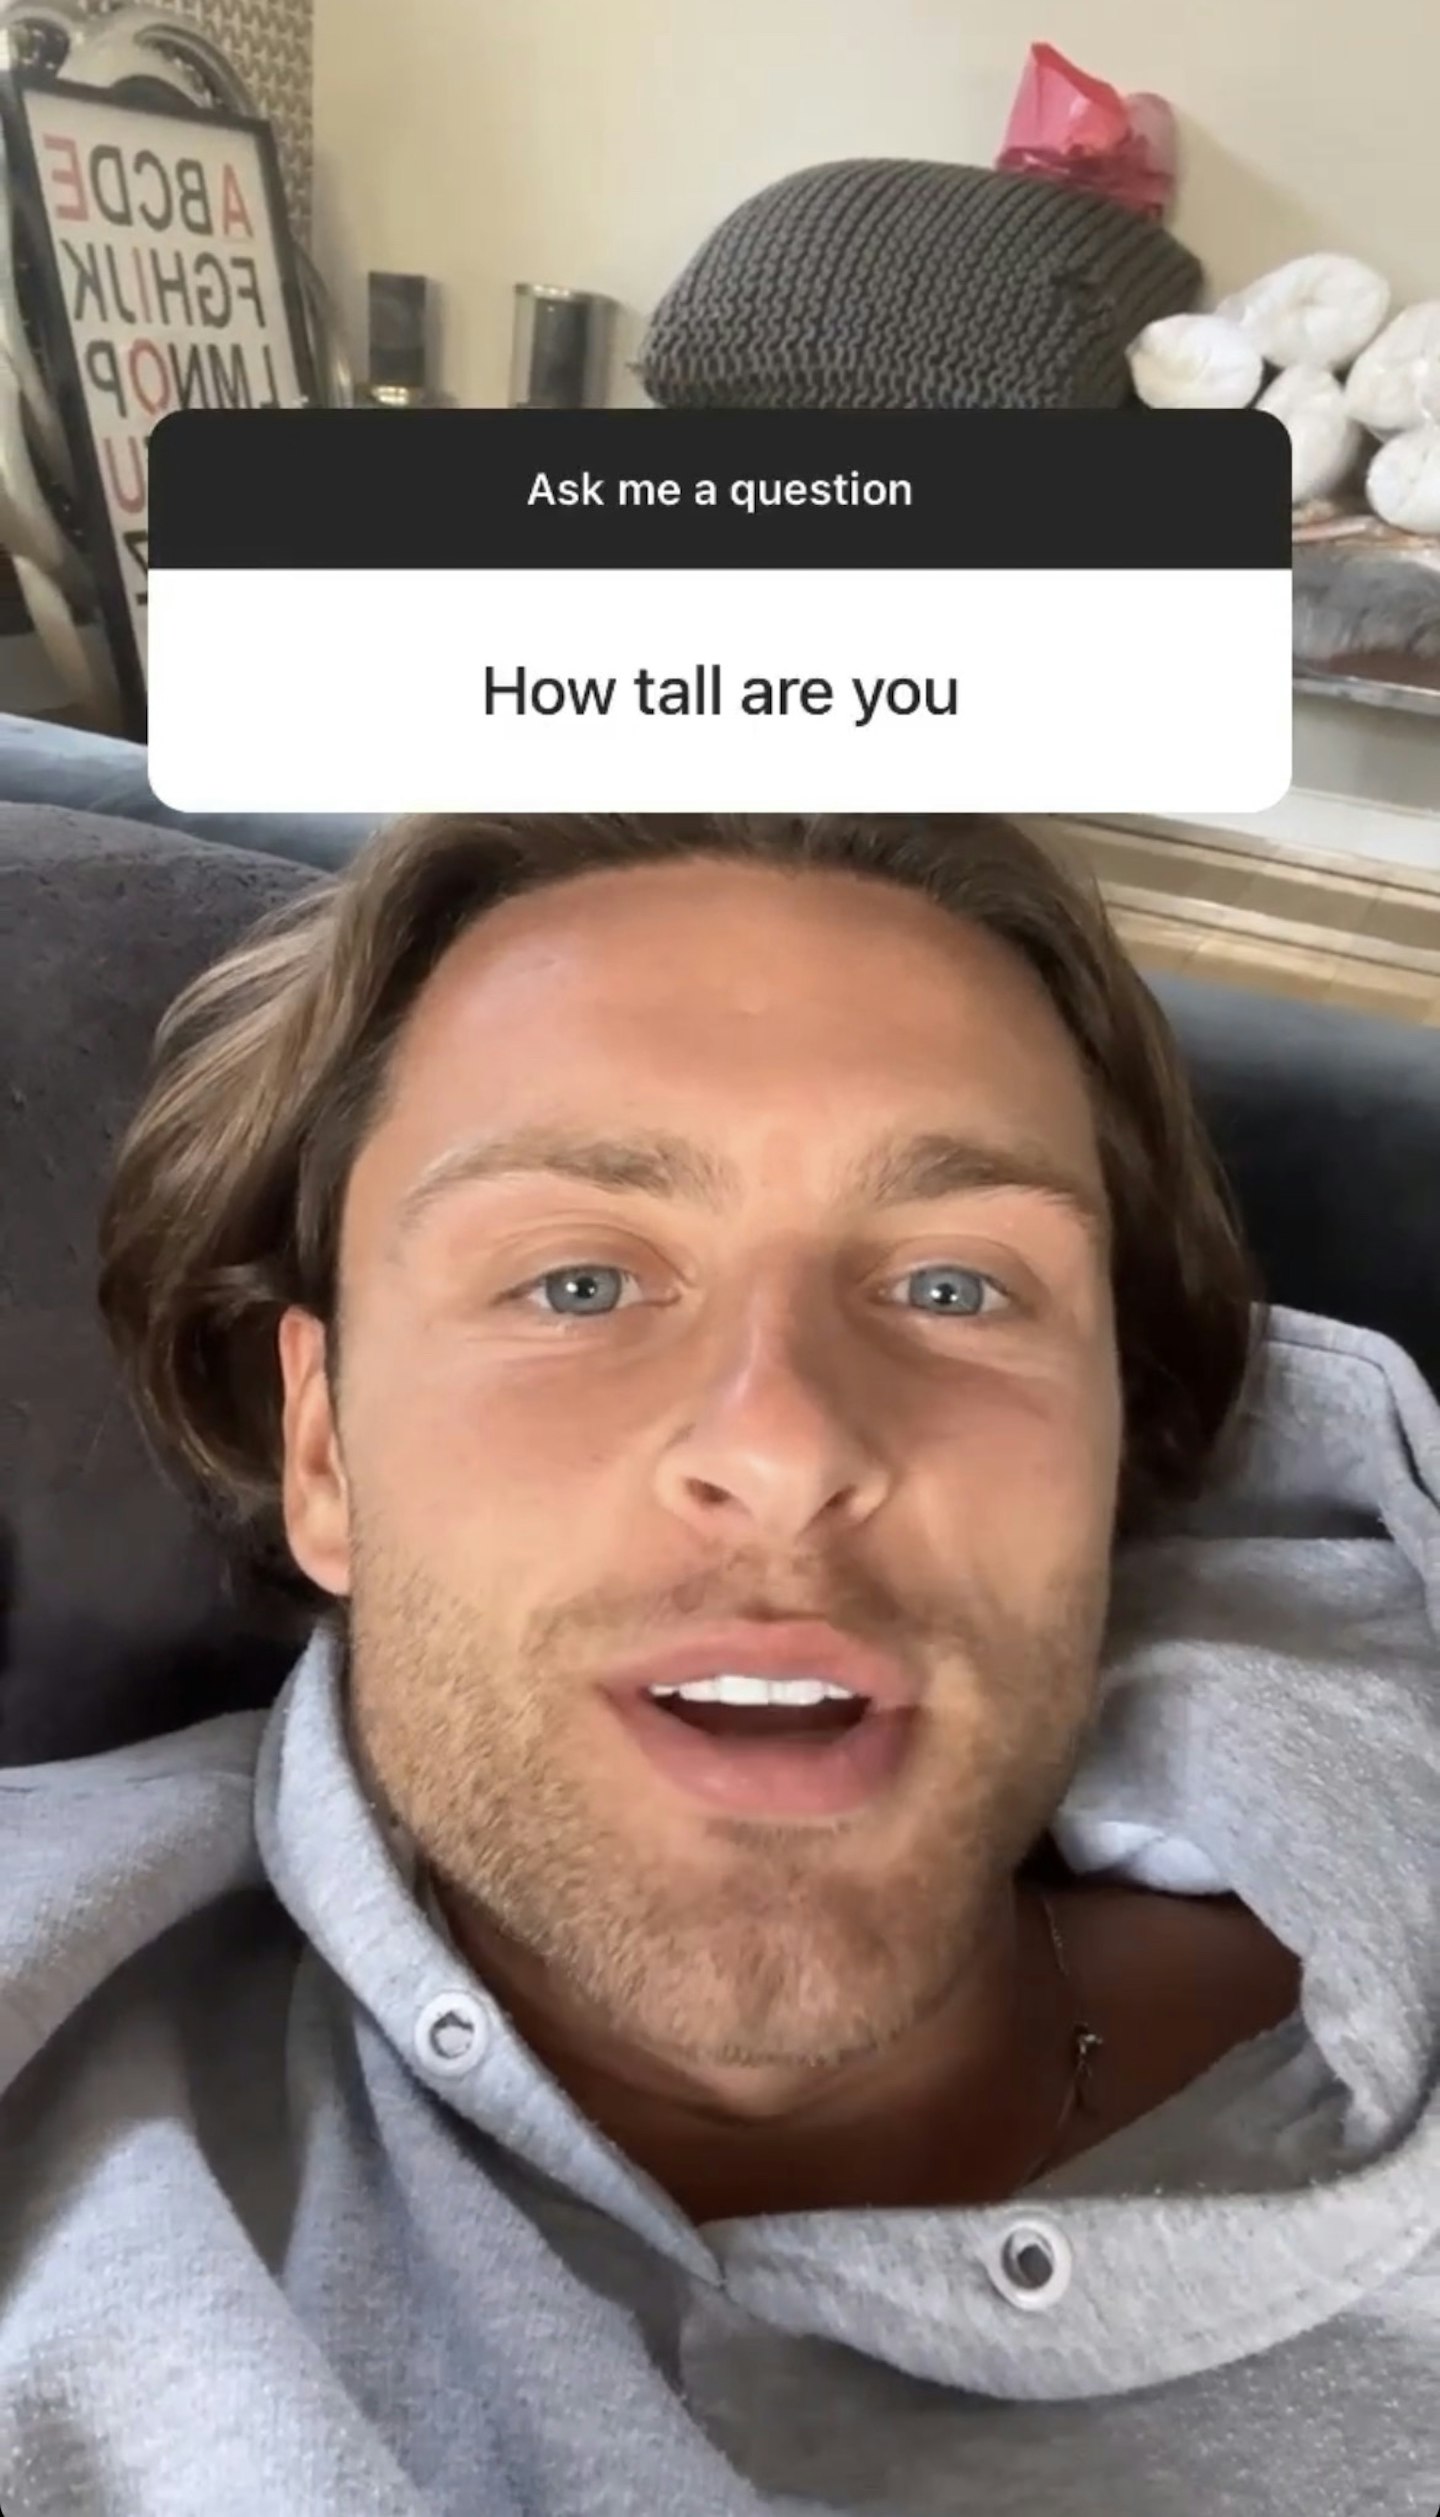 Casey O'Gorman's Instagram story about how tall he is